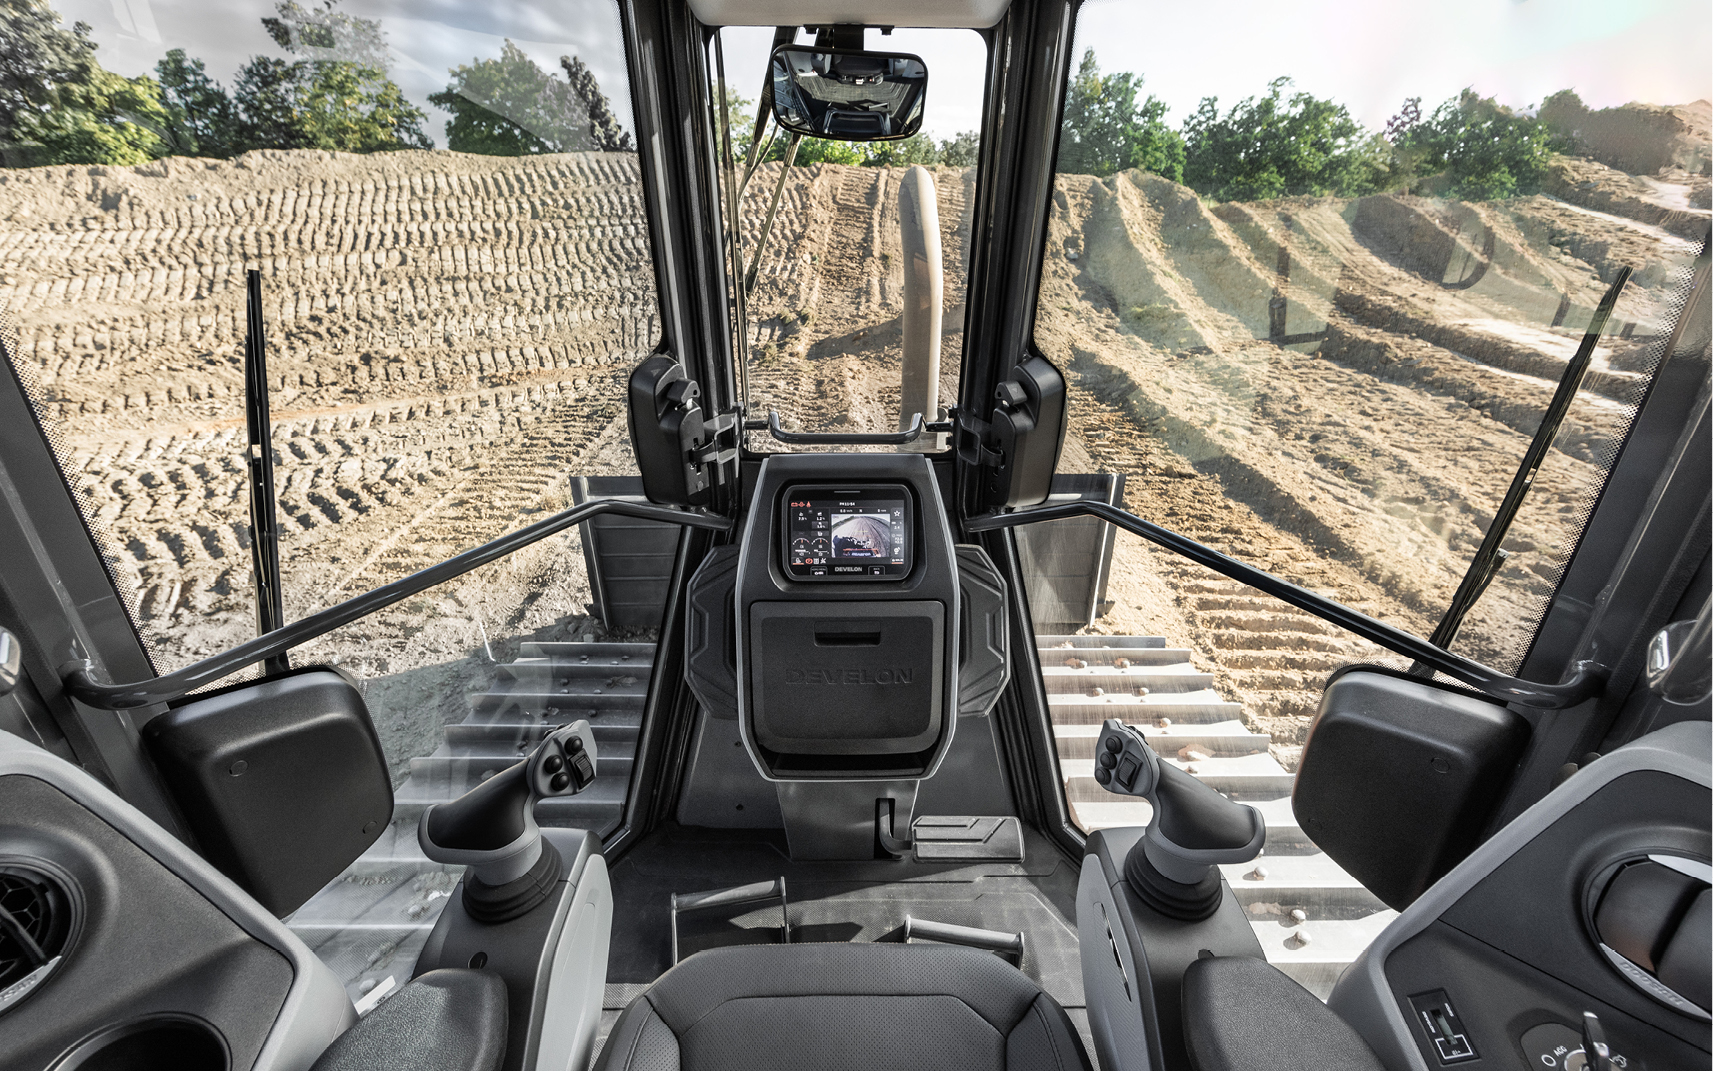 The operator cab of a DEVELON dozer featuring its visibility and various operator comfort features.